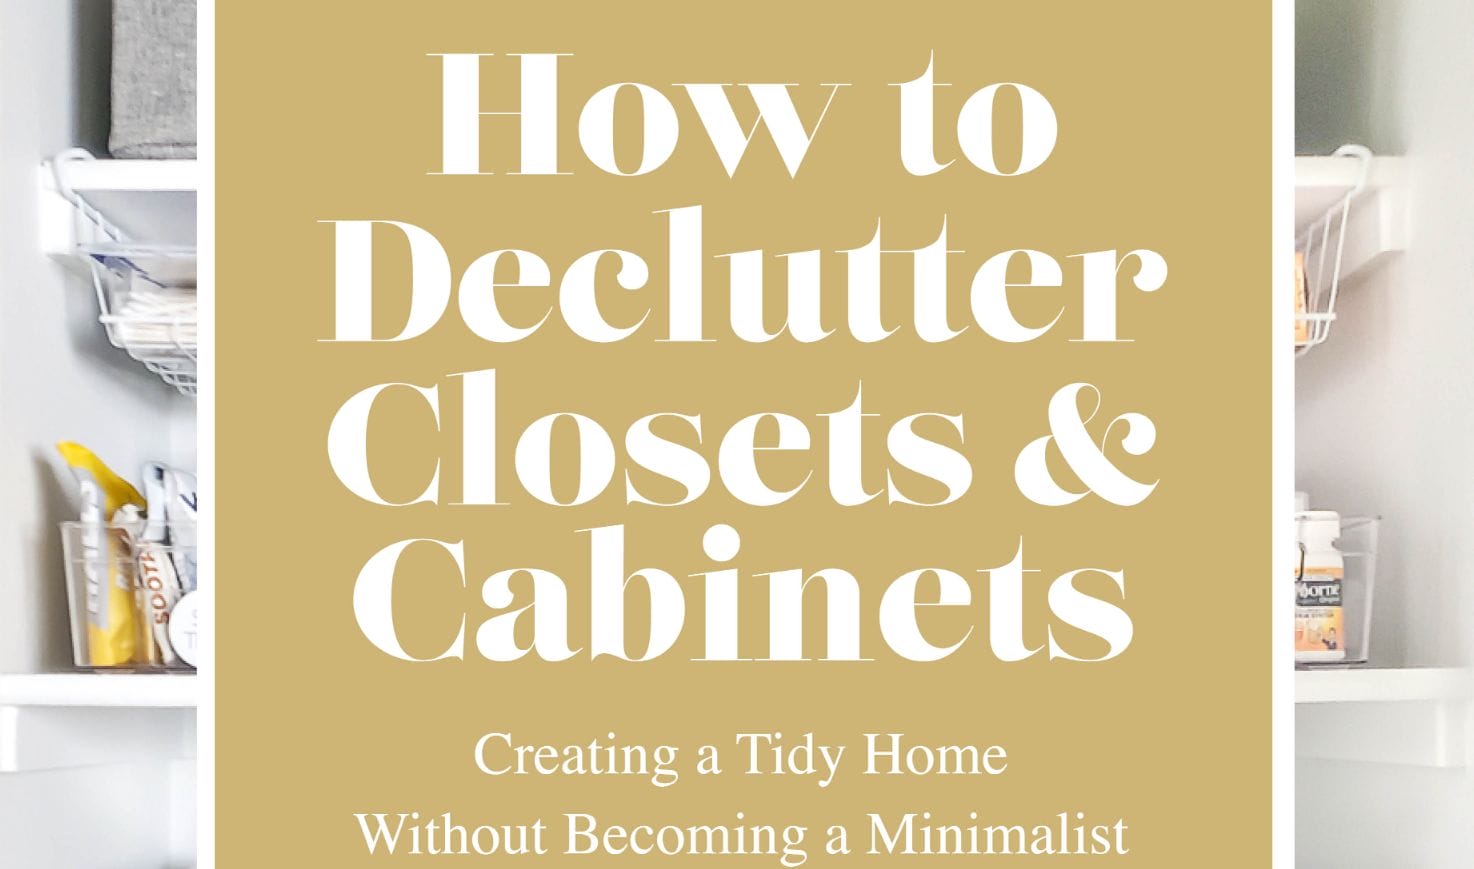 How to Declutter Closets & Cabinets